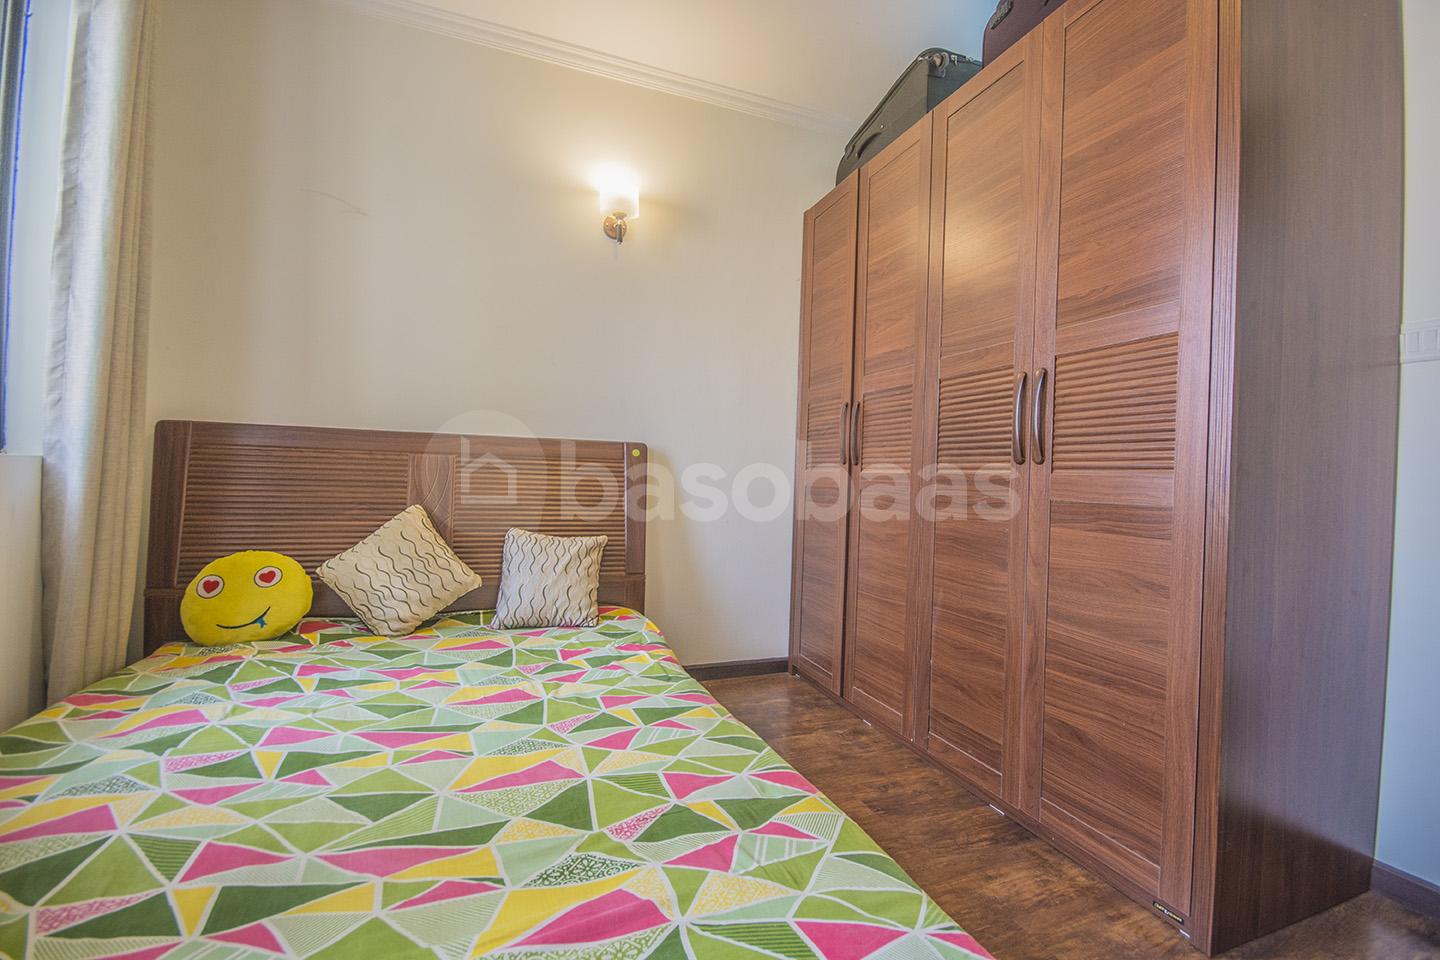 SOLD OUT: Apartment : Apartment for Sale in Jhamsikhel, Lalitpur Image 12